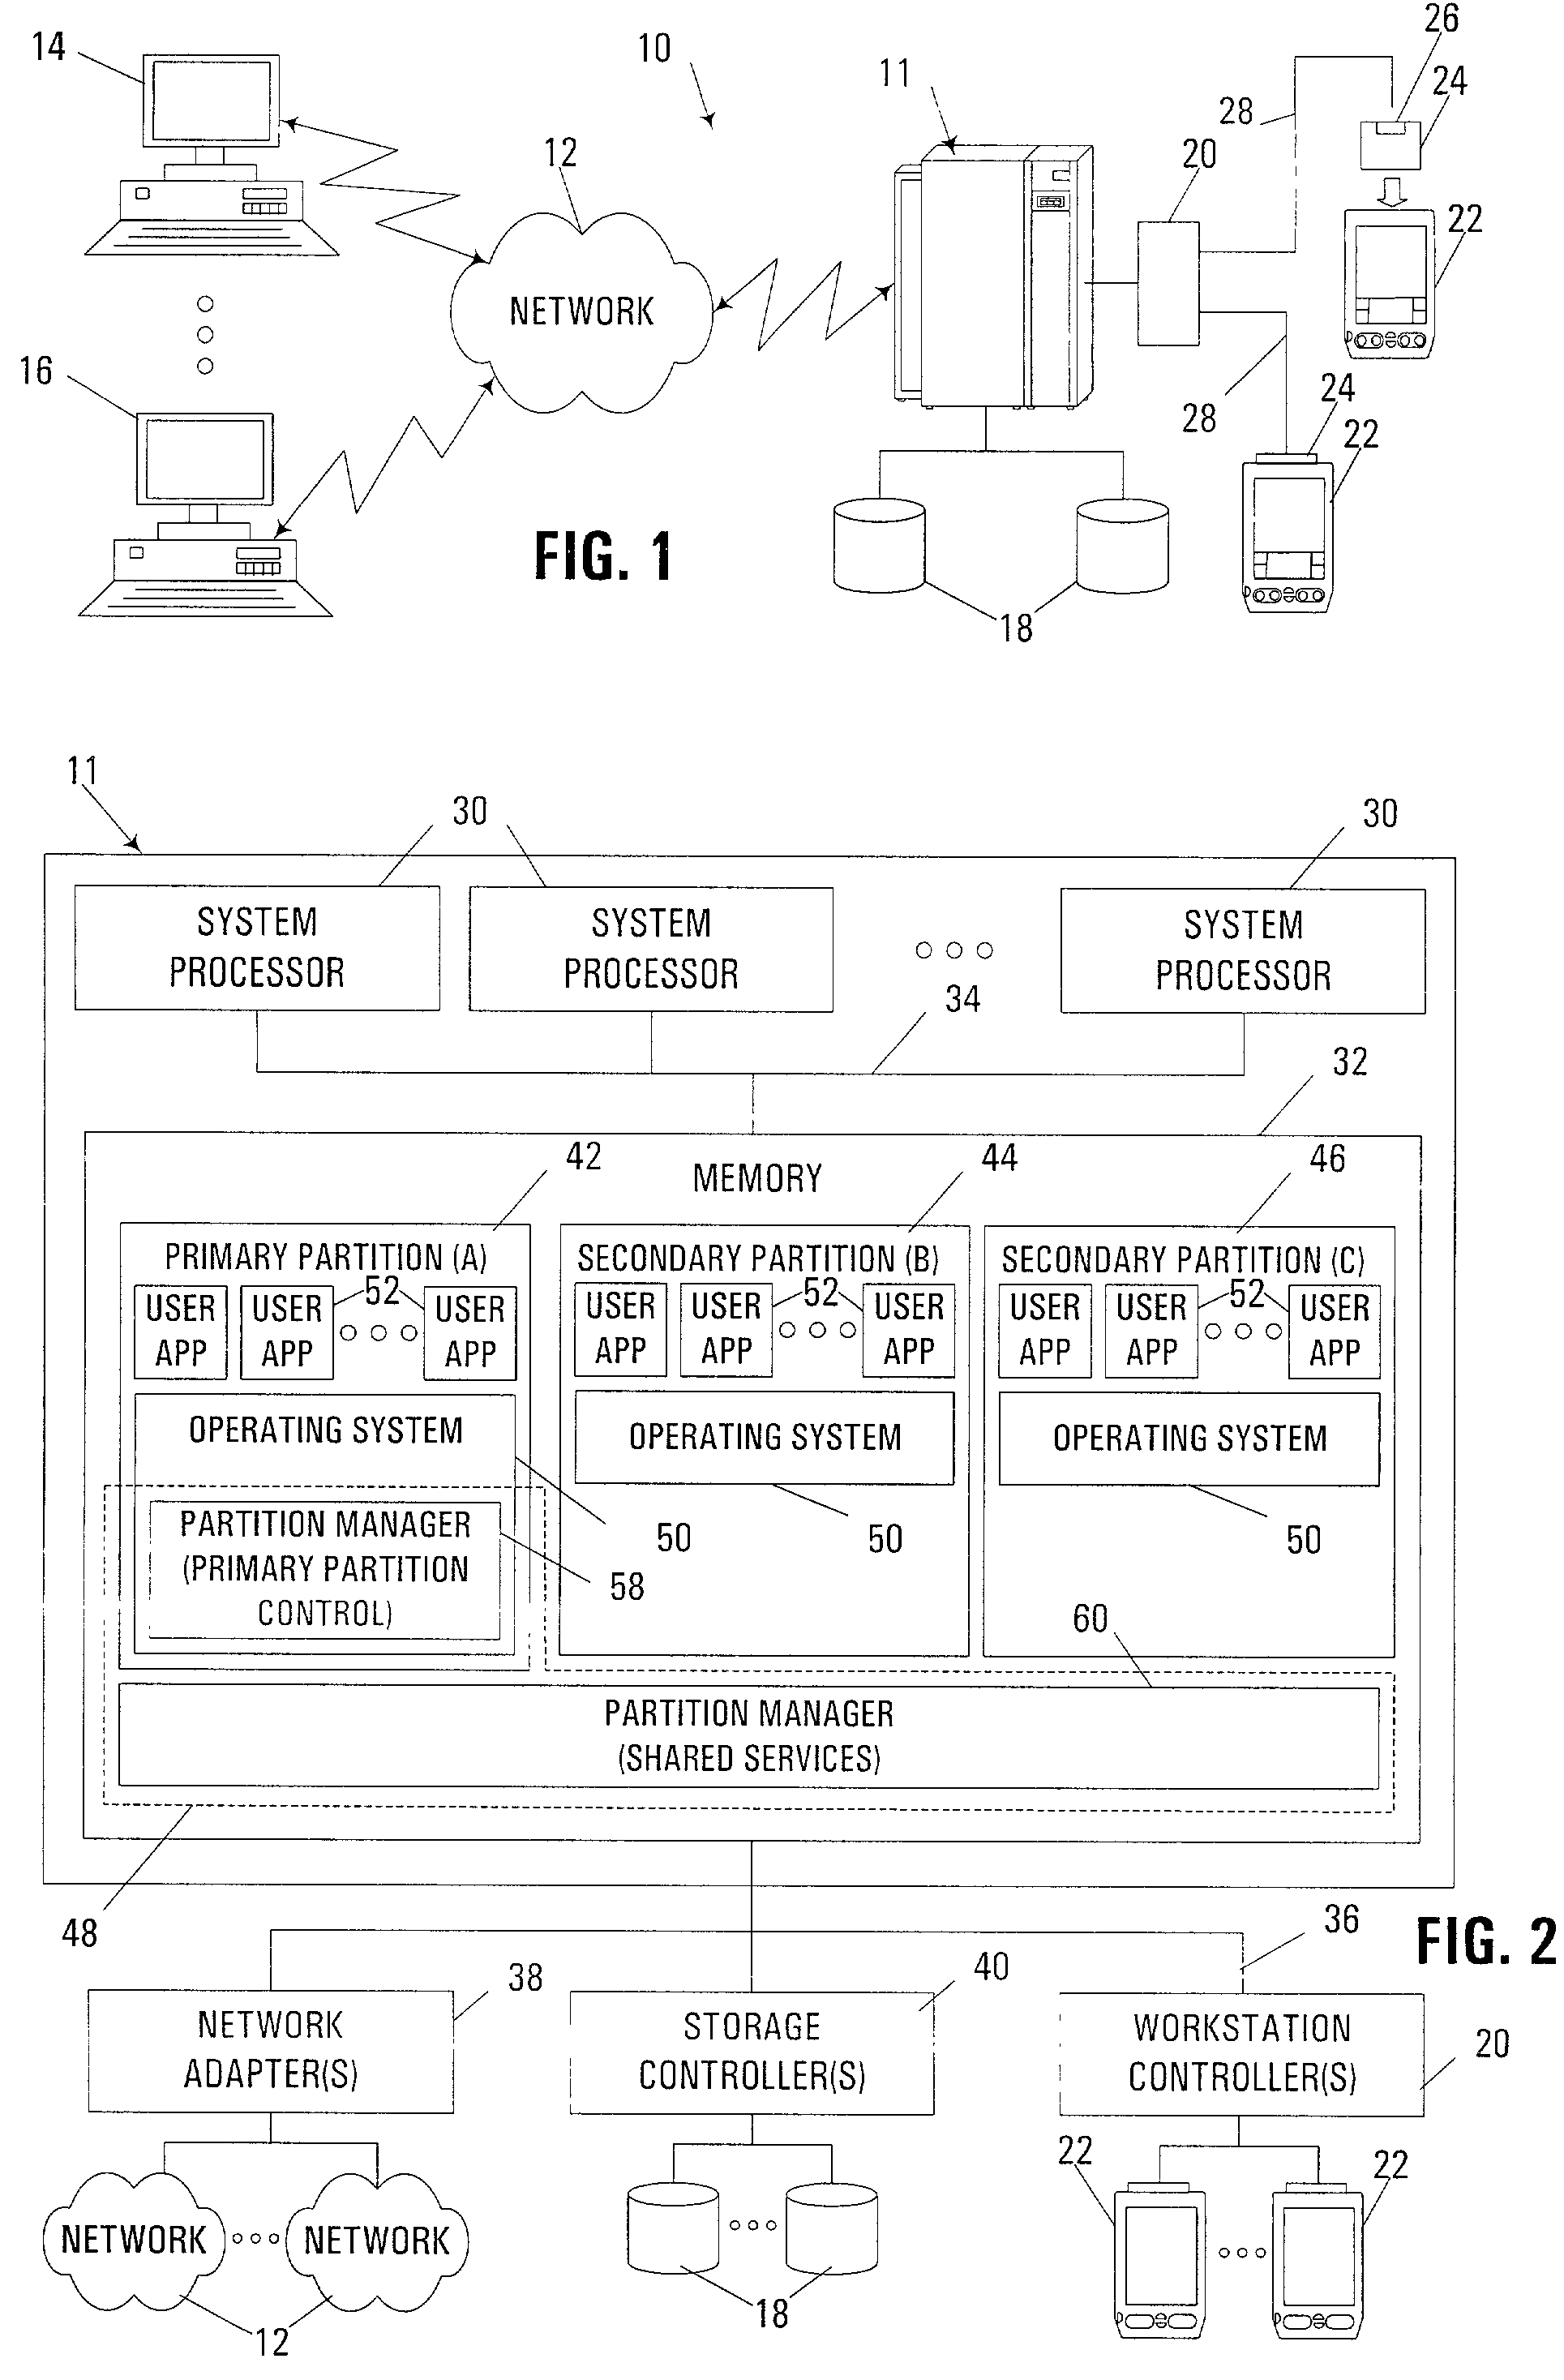 Handheld computer console emulation module and method of managing a logically-partitioned multi-user computer with same